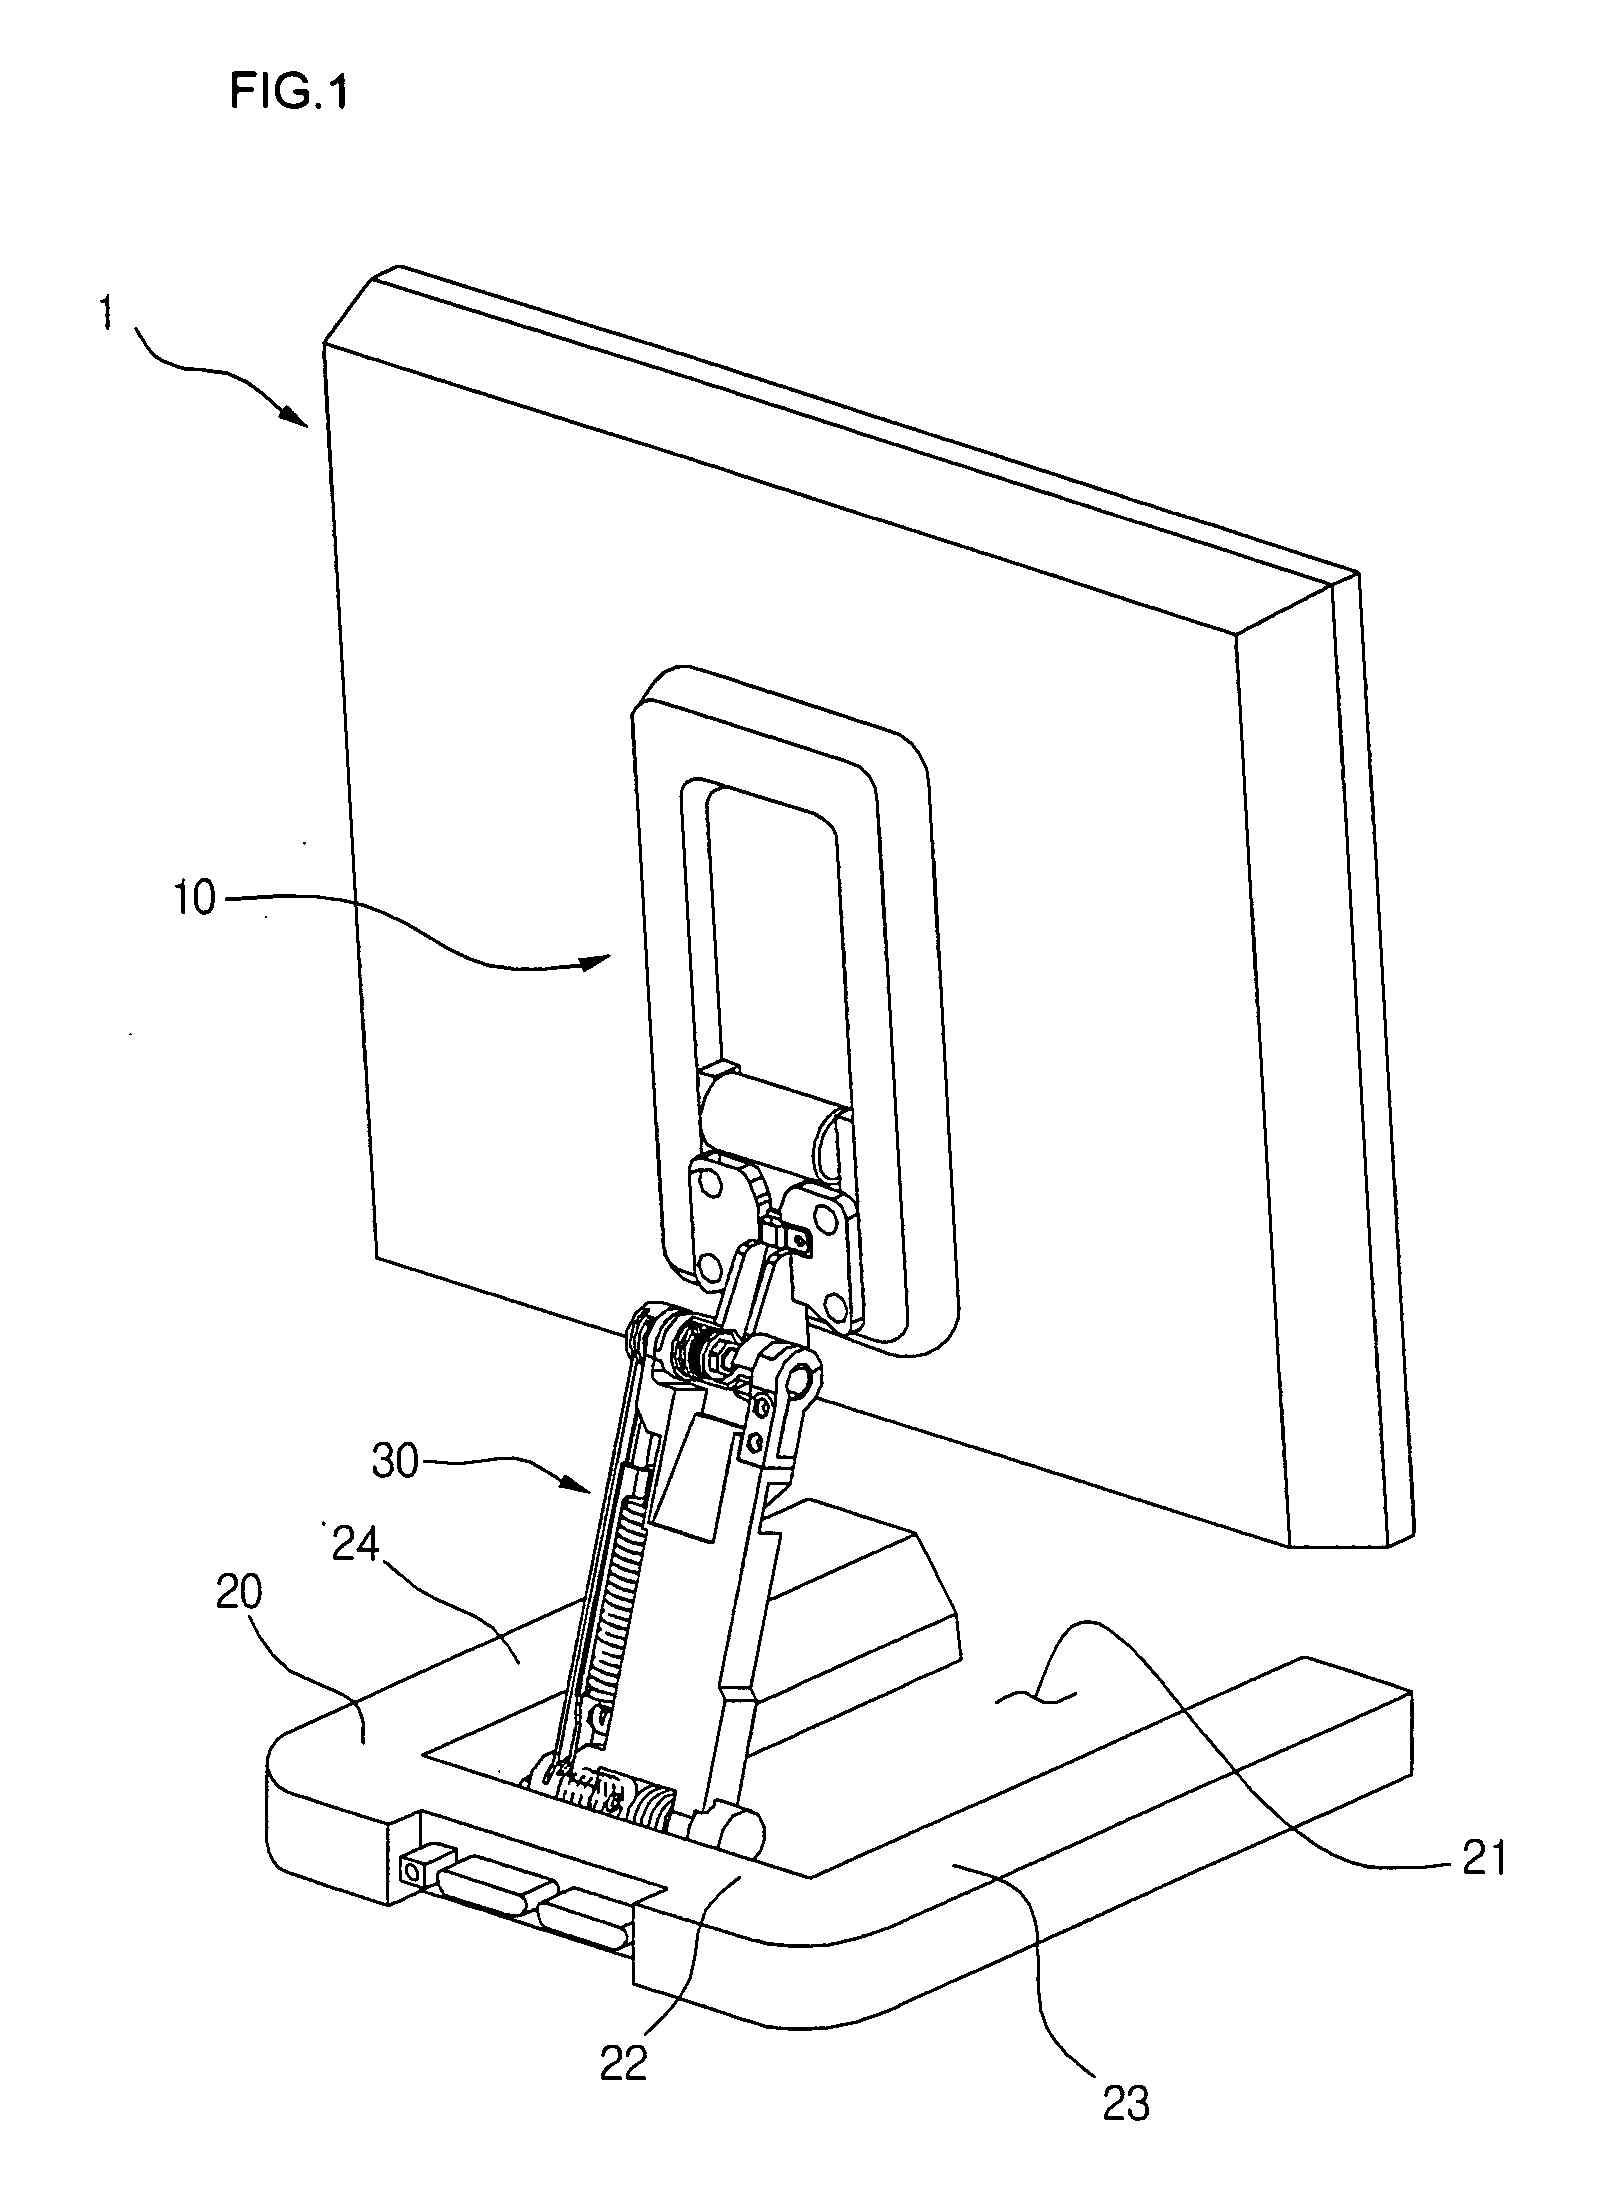 Stand of a display device